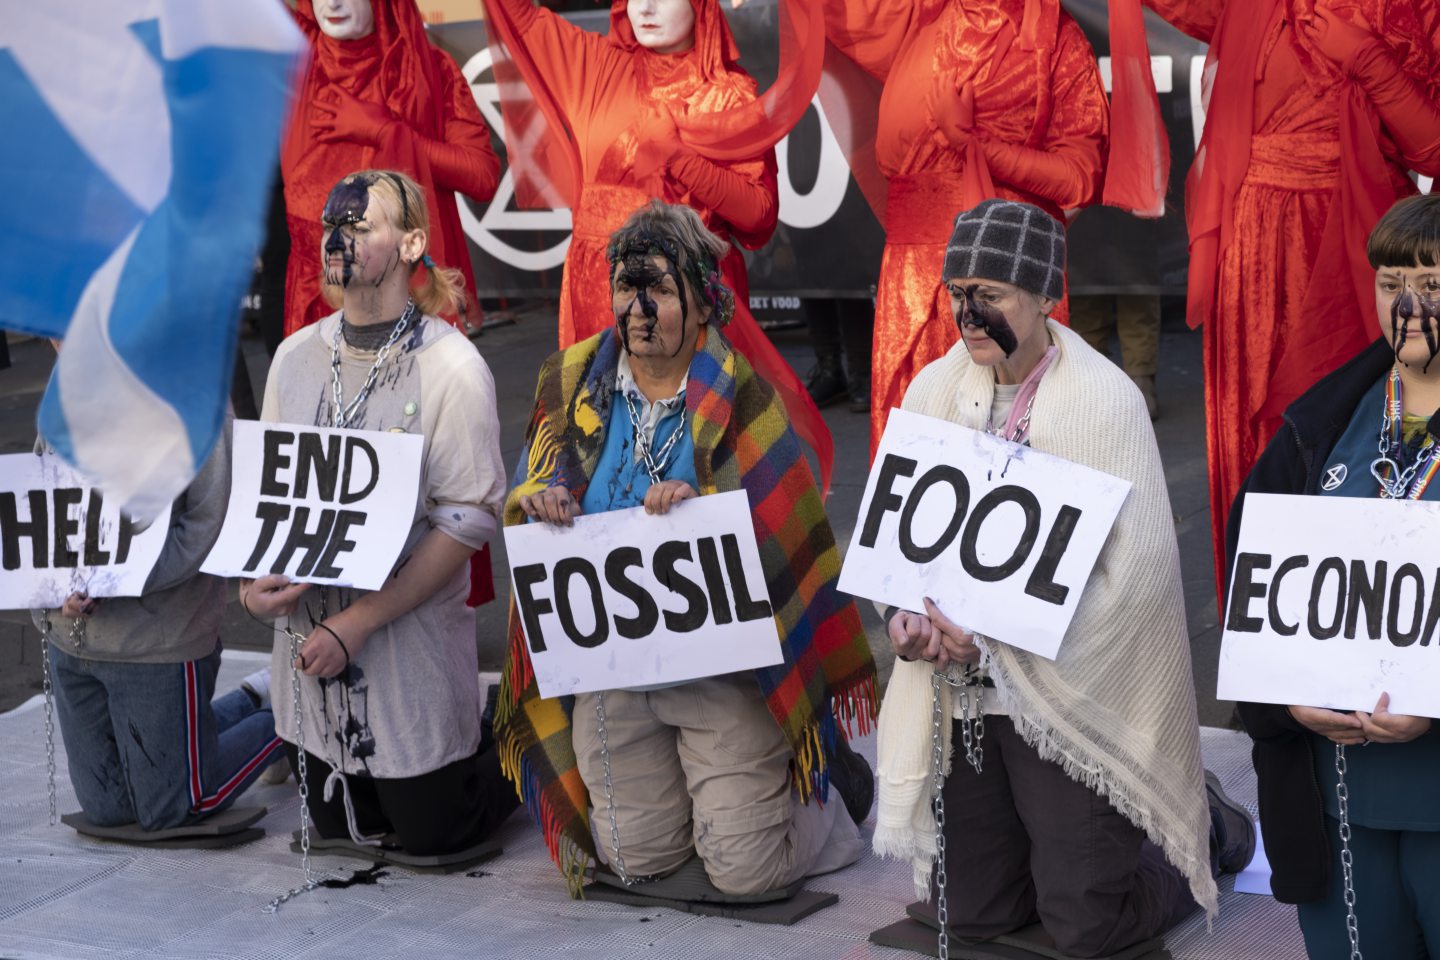 Just Stop Oil advocating to end fossil fuel